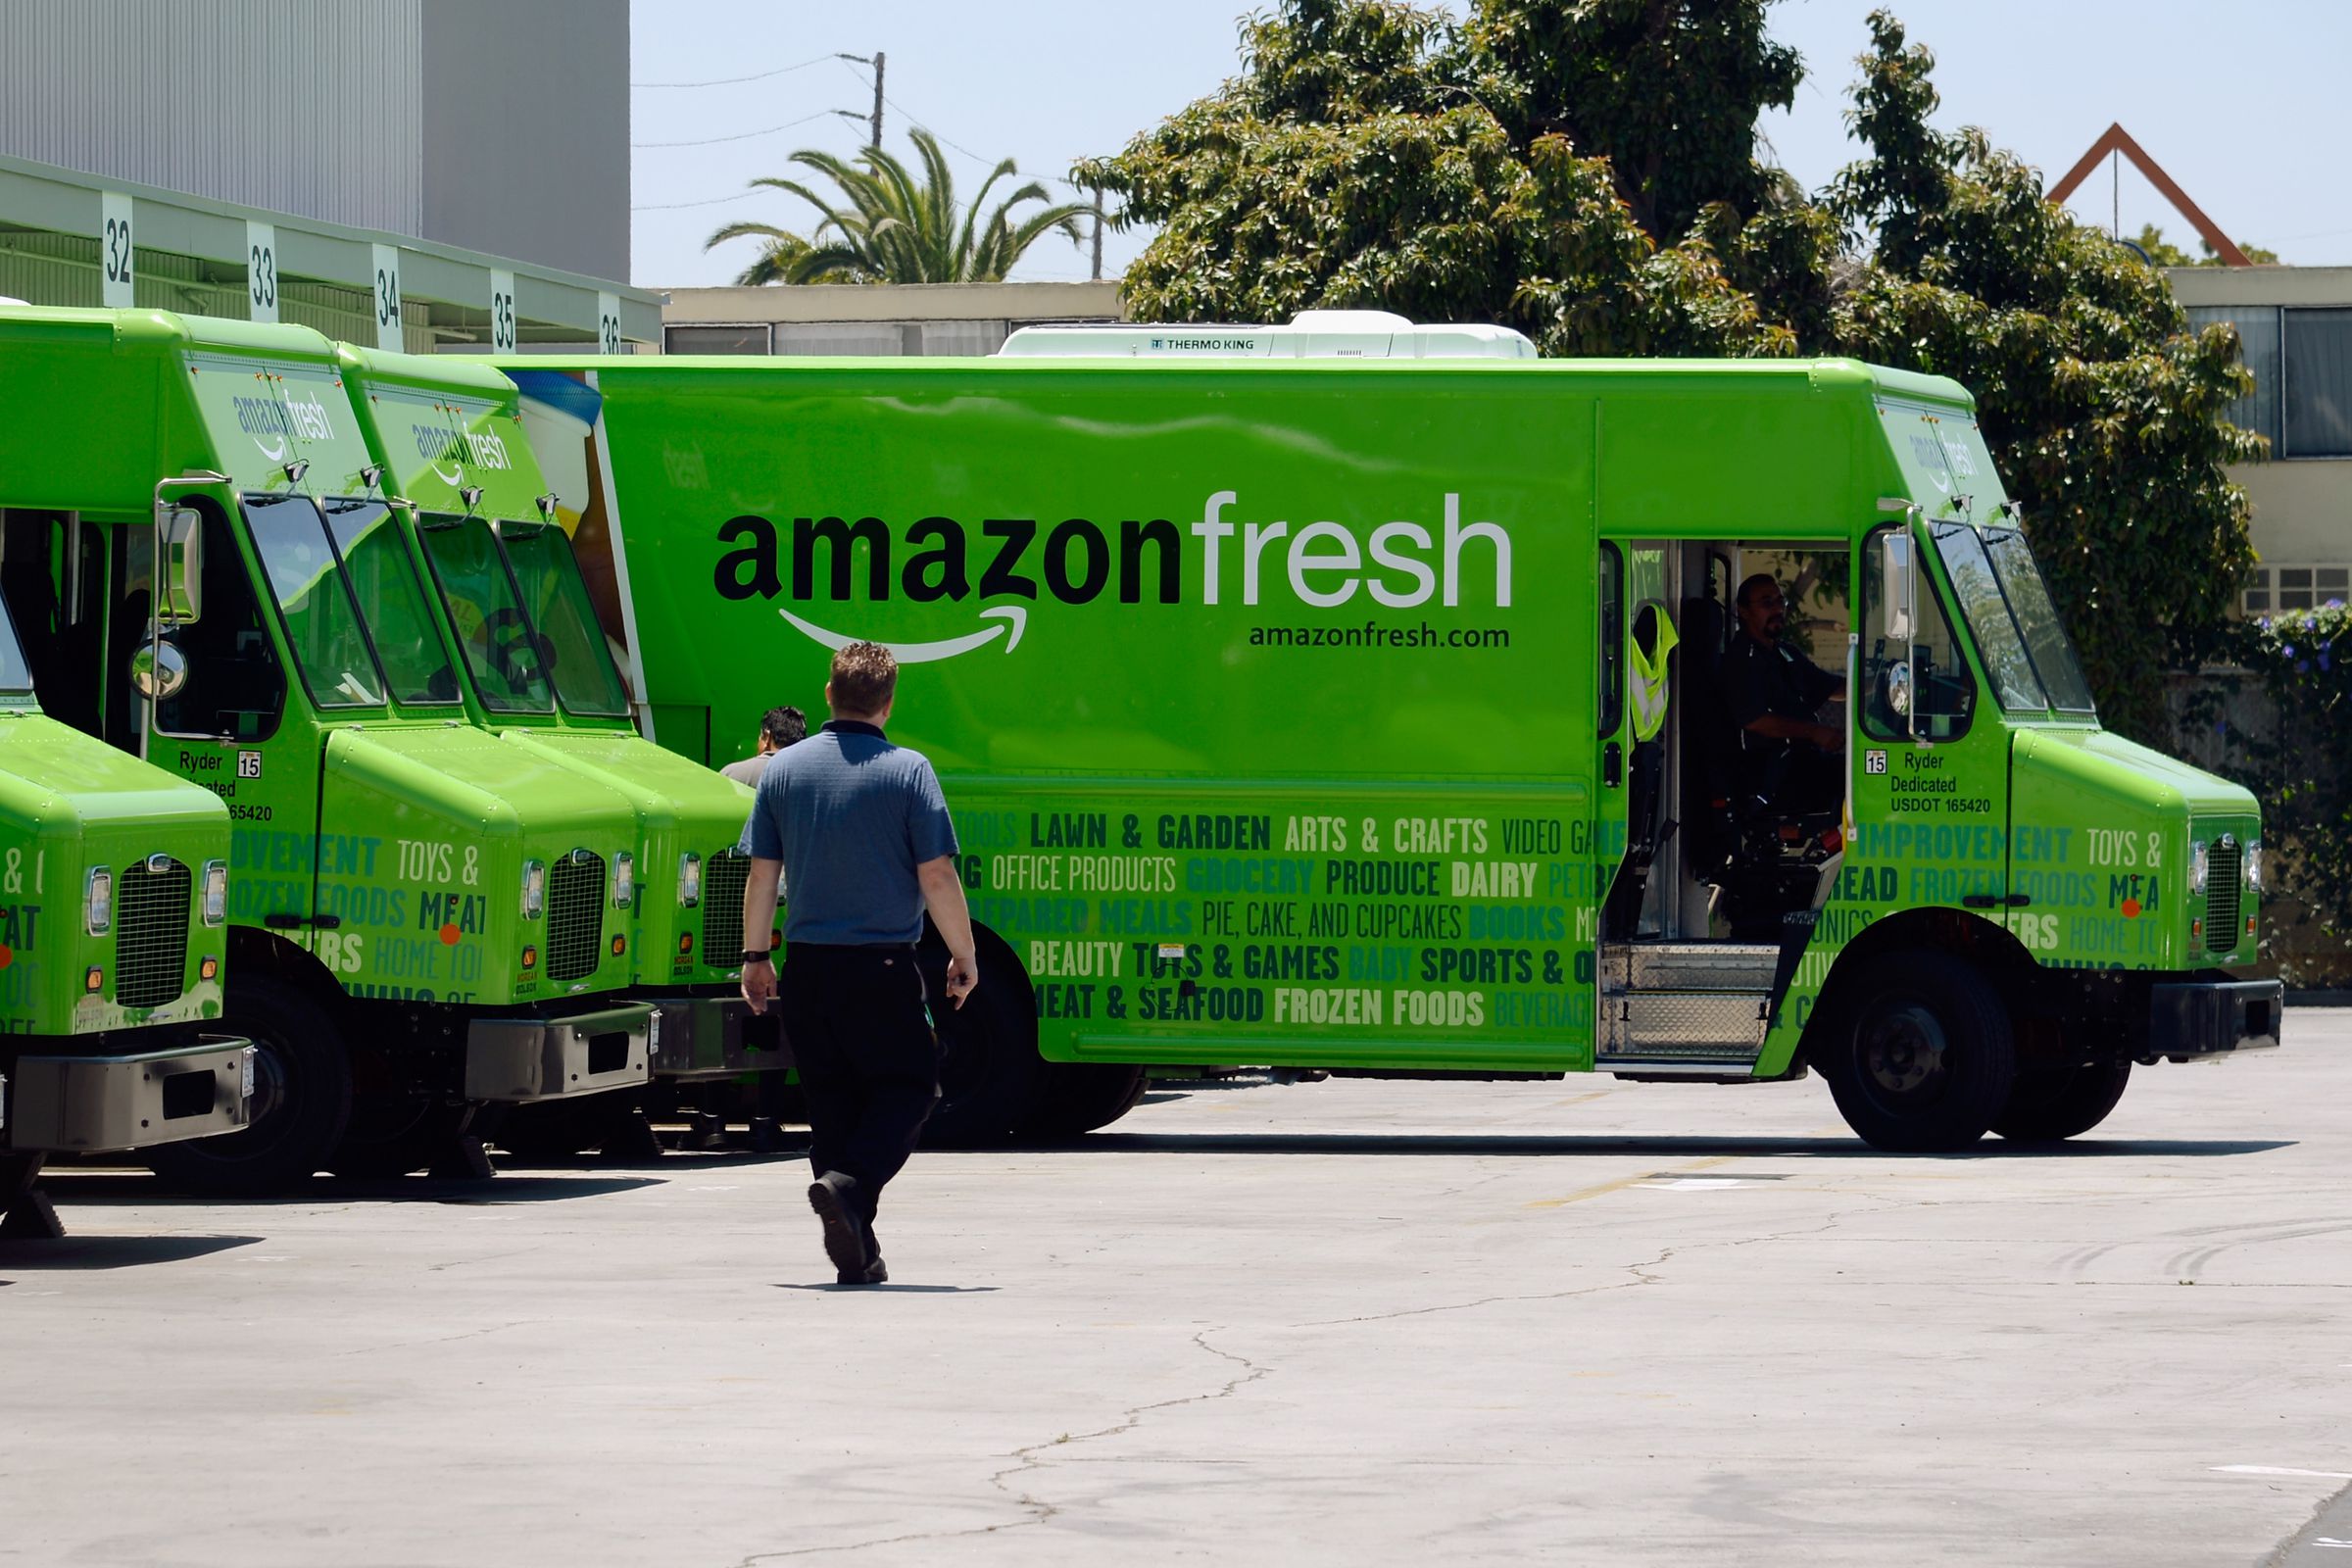 Amazon Expands Grocery Delivery Service To Los Angeles Area